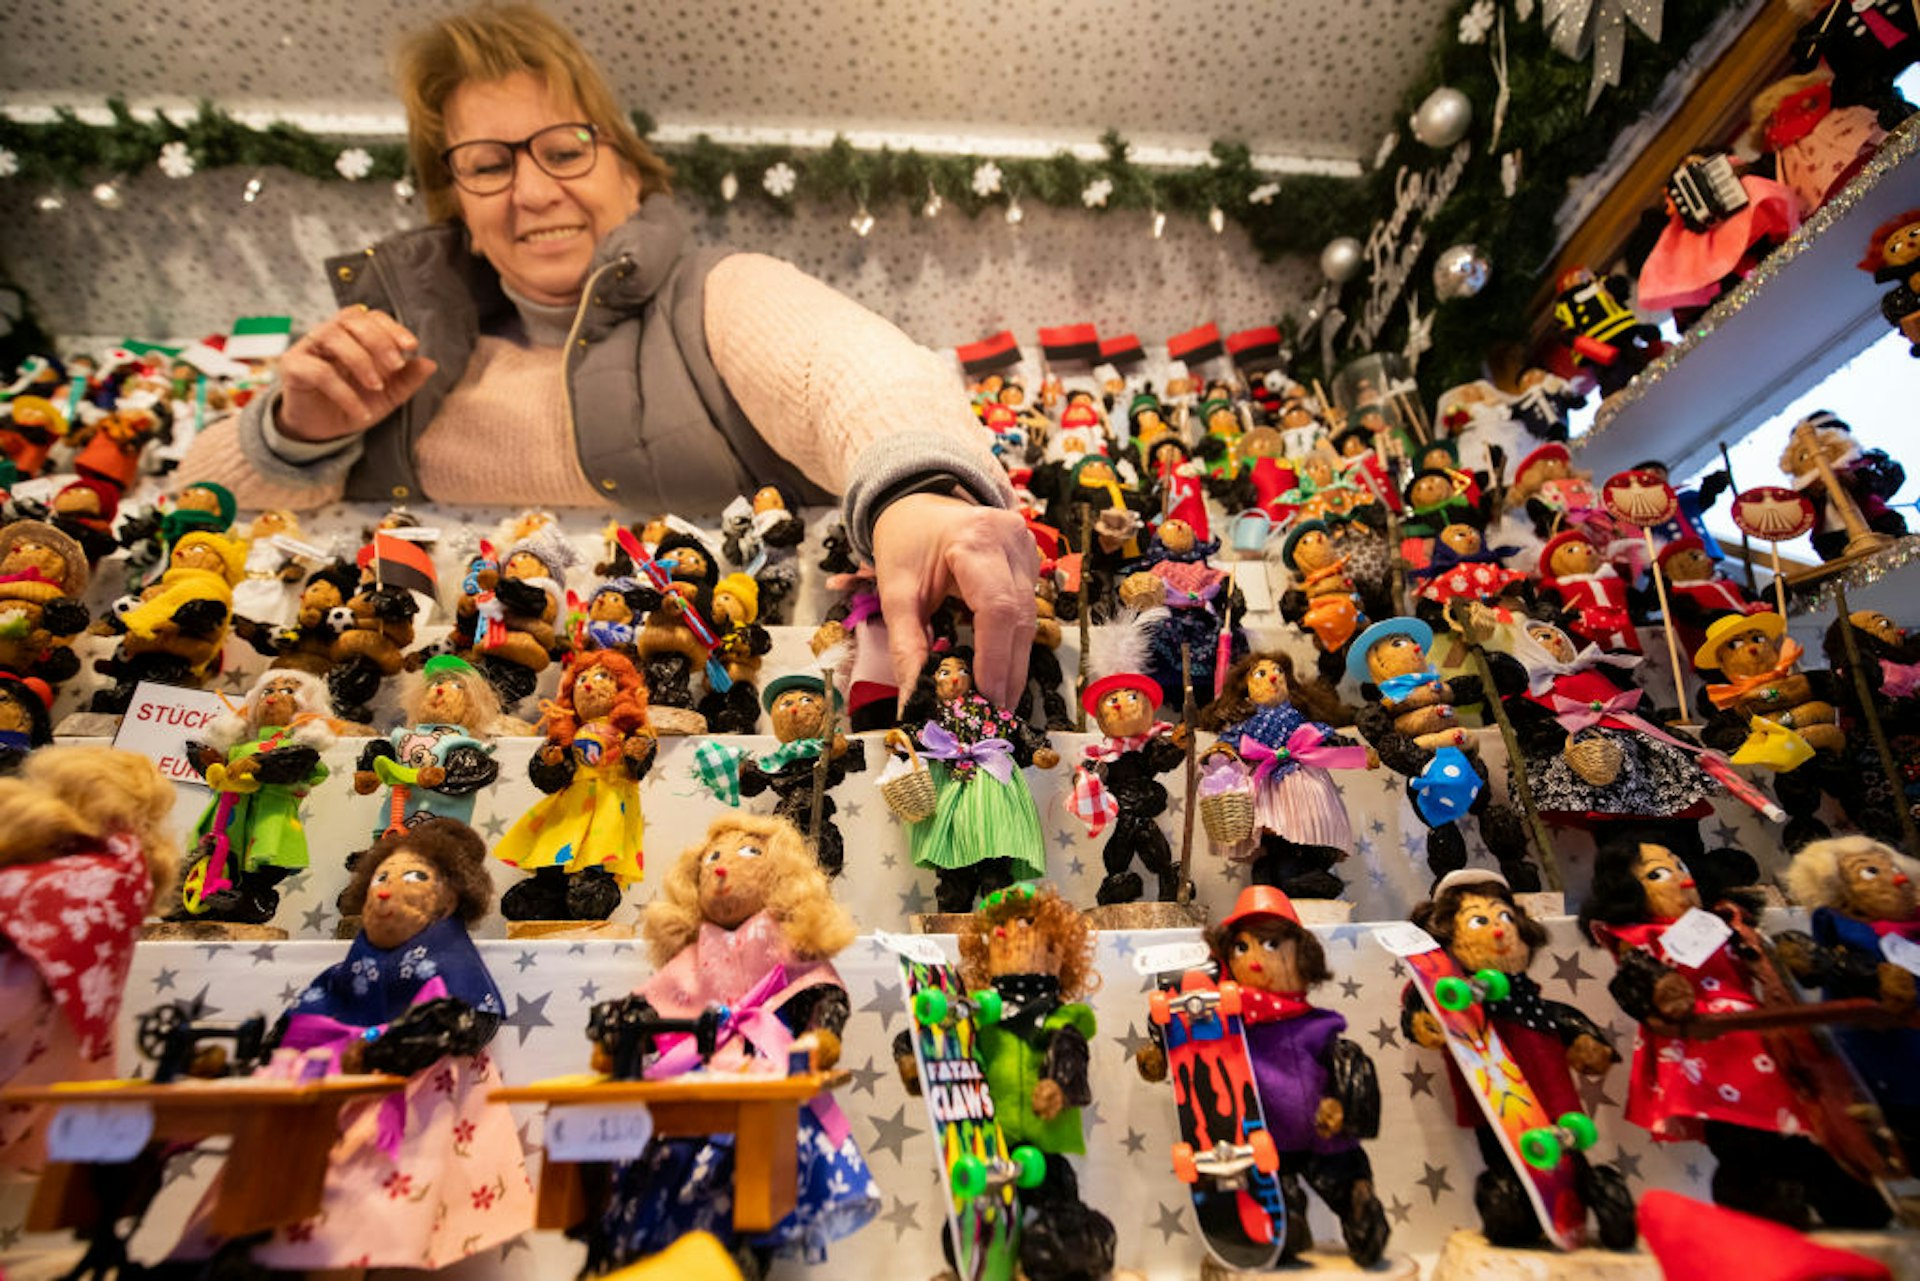 A stall holder arranging a display of prune men, figures made from dried plums, at Nuremberg Christmas Market, Germany